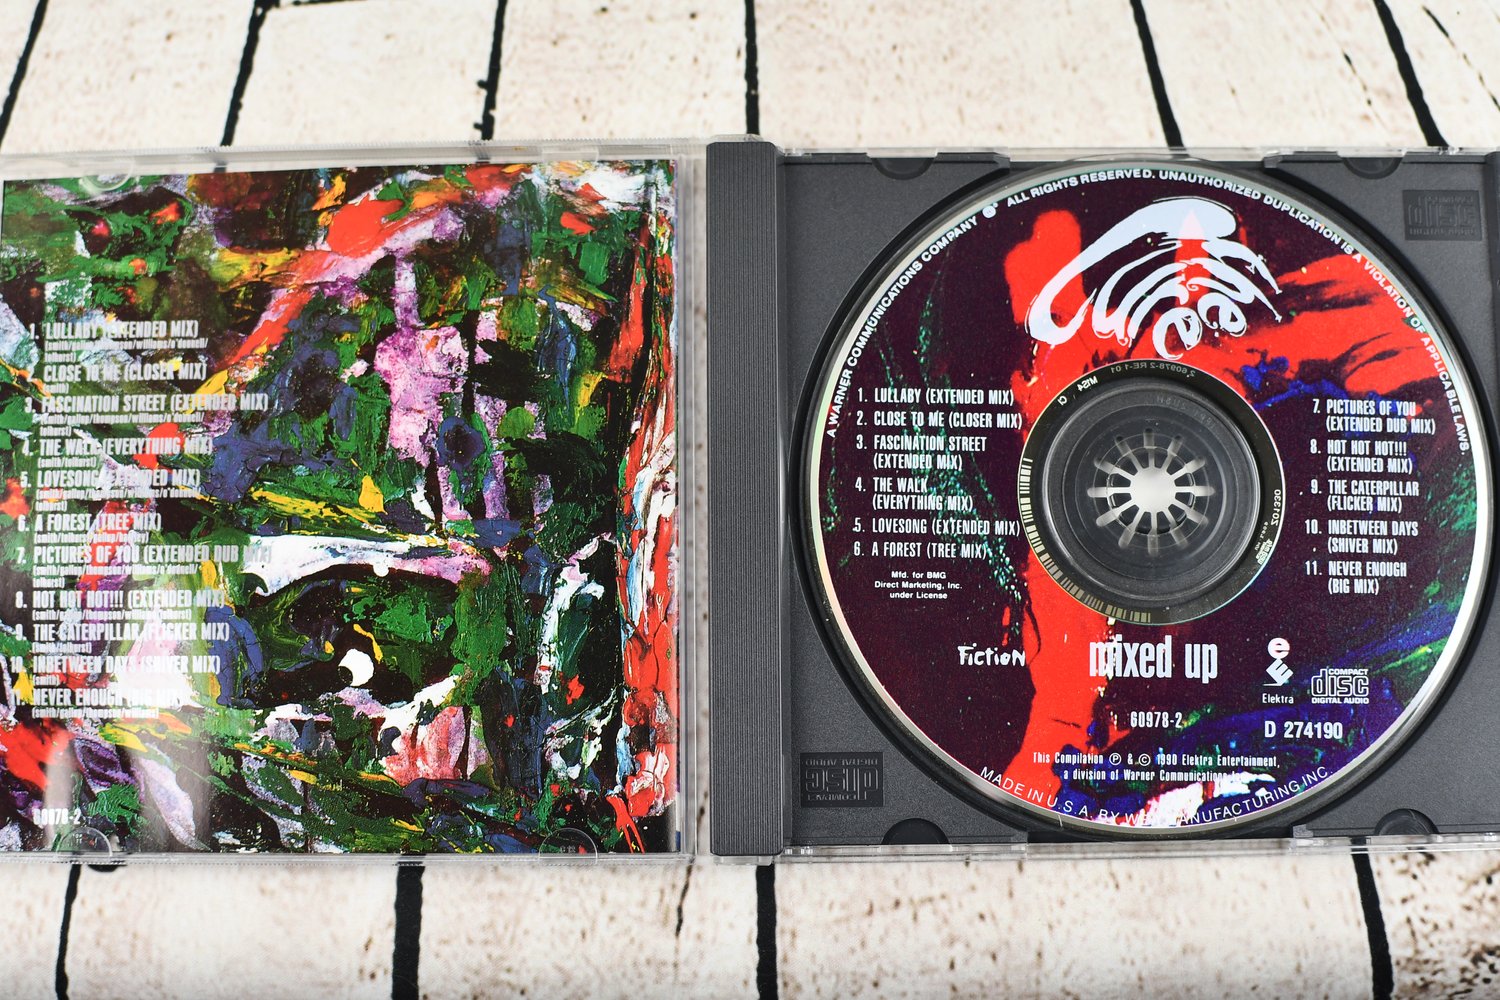 The Cure – Mixed Up - CD 1990 — Spin N Round Music & Collectibles